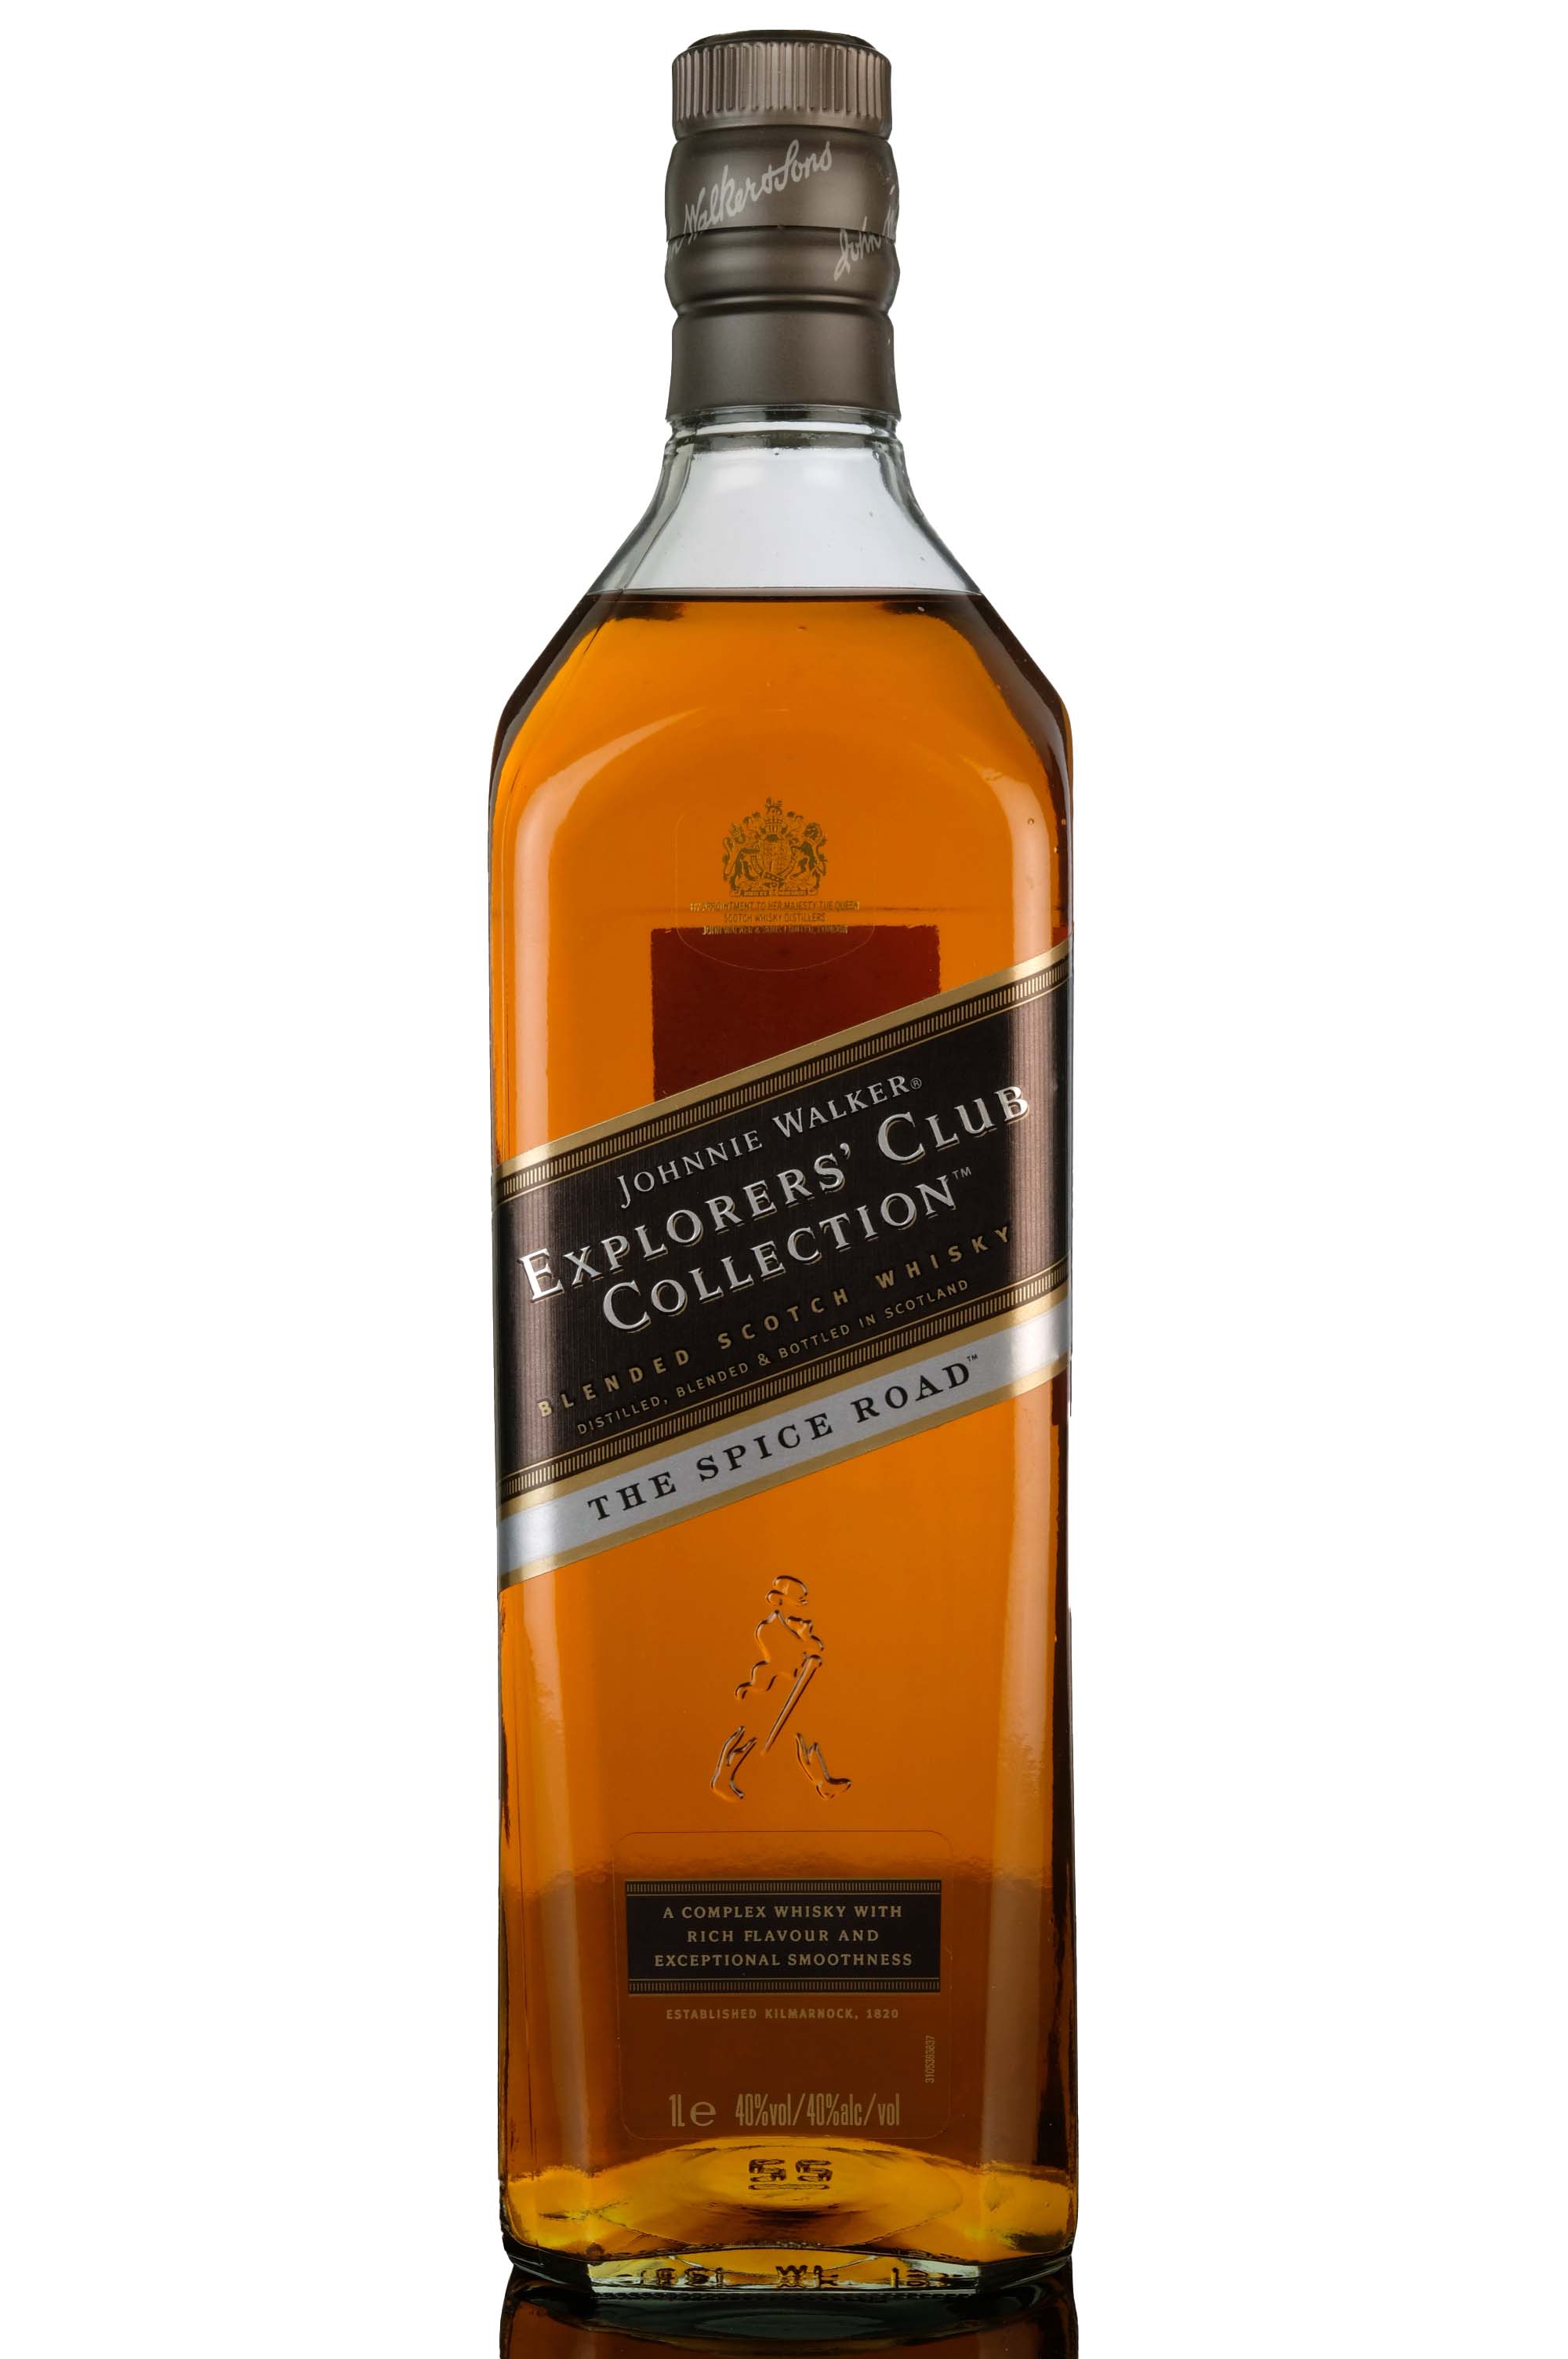 Johnnie Walker Explorers Club Collection - The Spice Road - 1 Litre